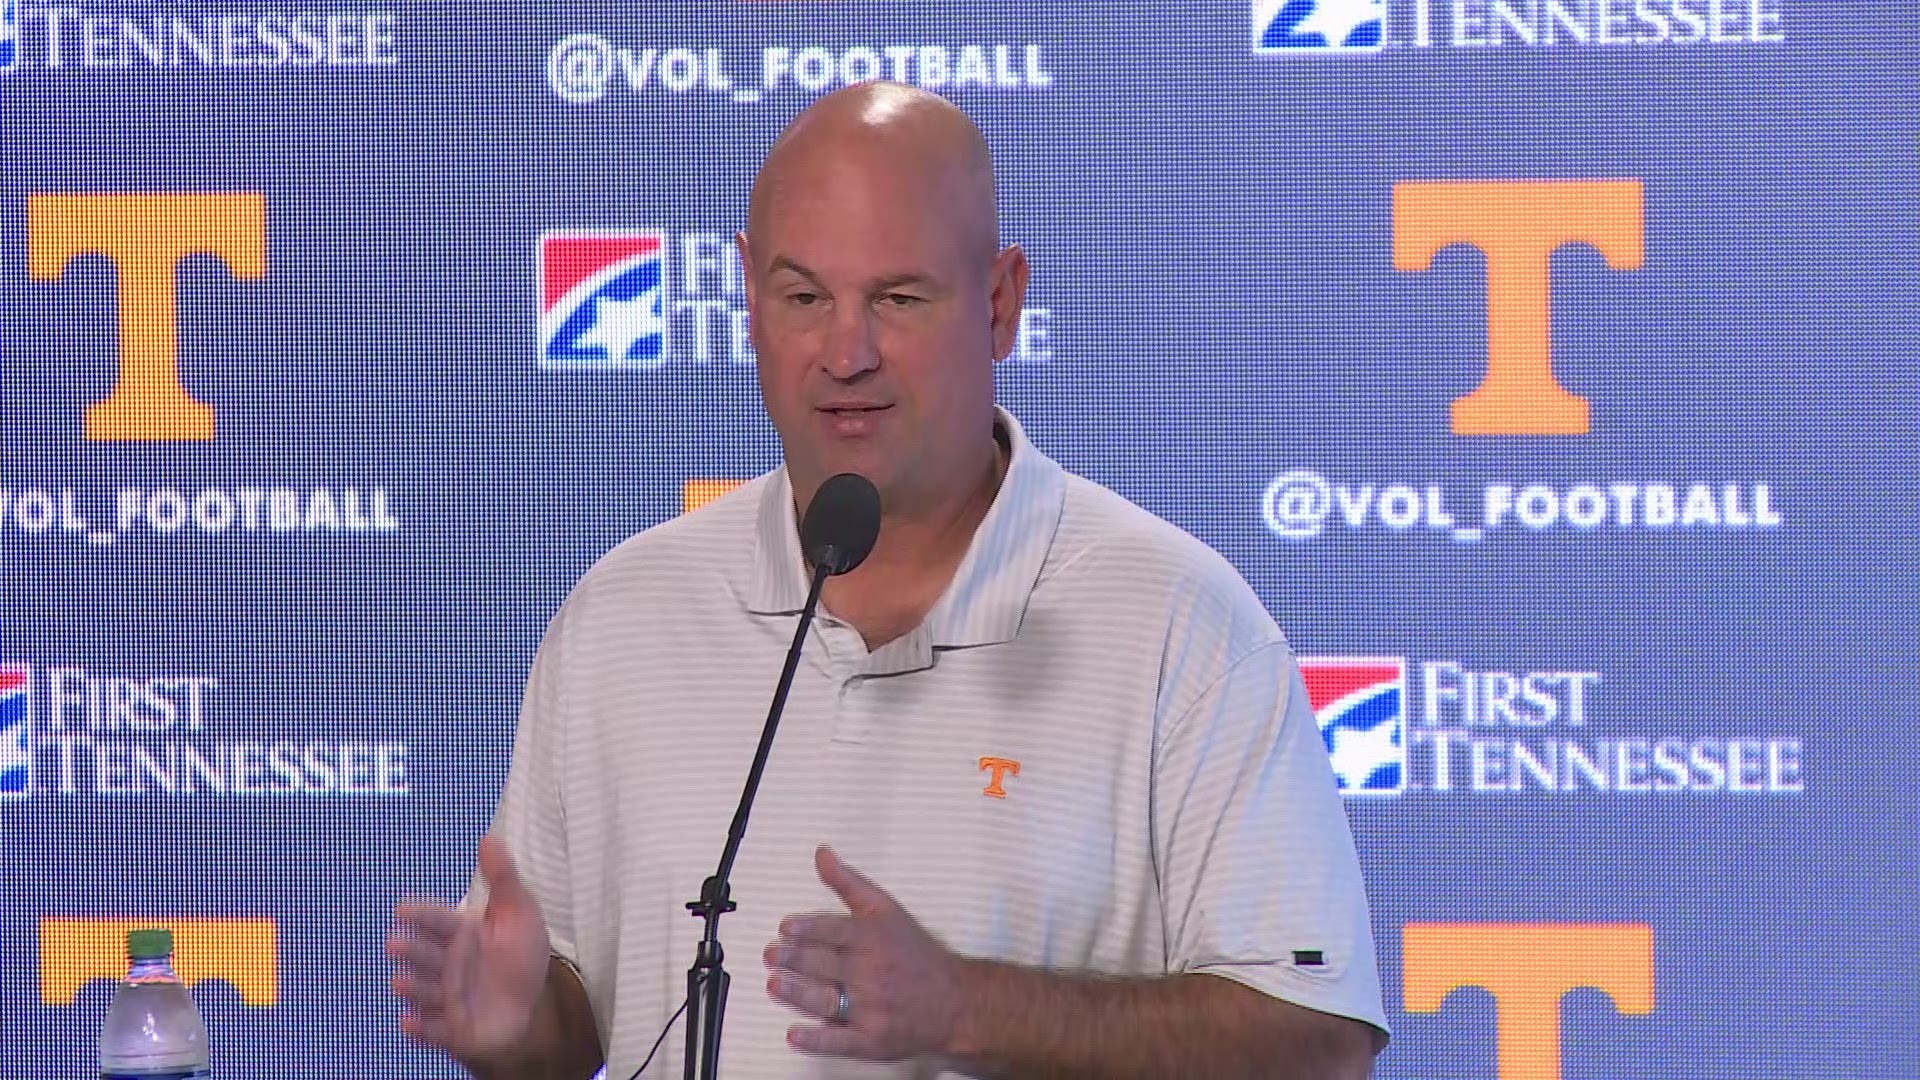 Jeremy Pruitt is moving forward after the Vols 0-2 start. He liked how Tennessee improved from week one to week two and is looking for more of that heading into this week's game against Chattanooga.